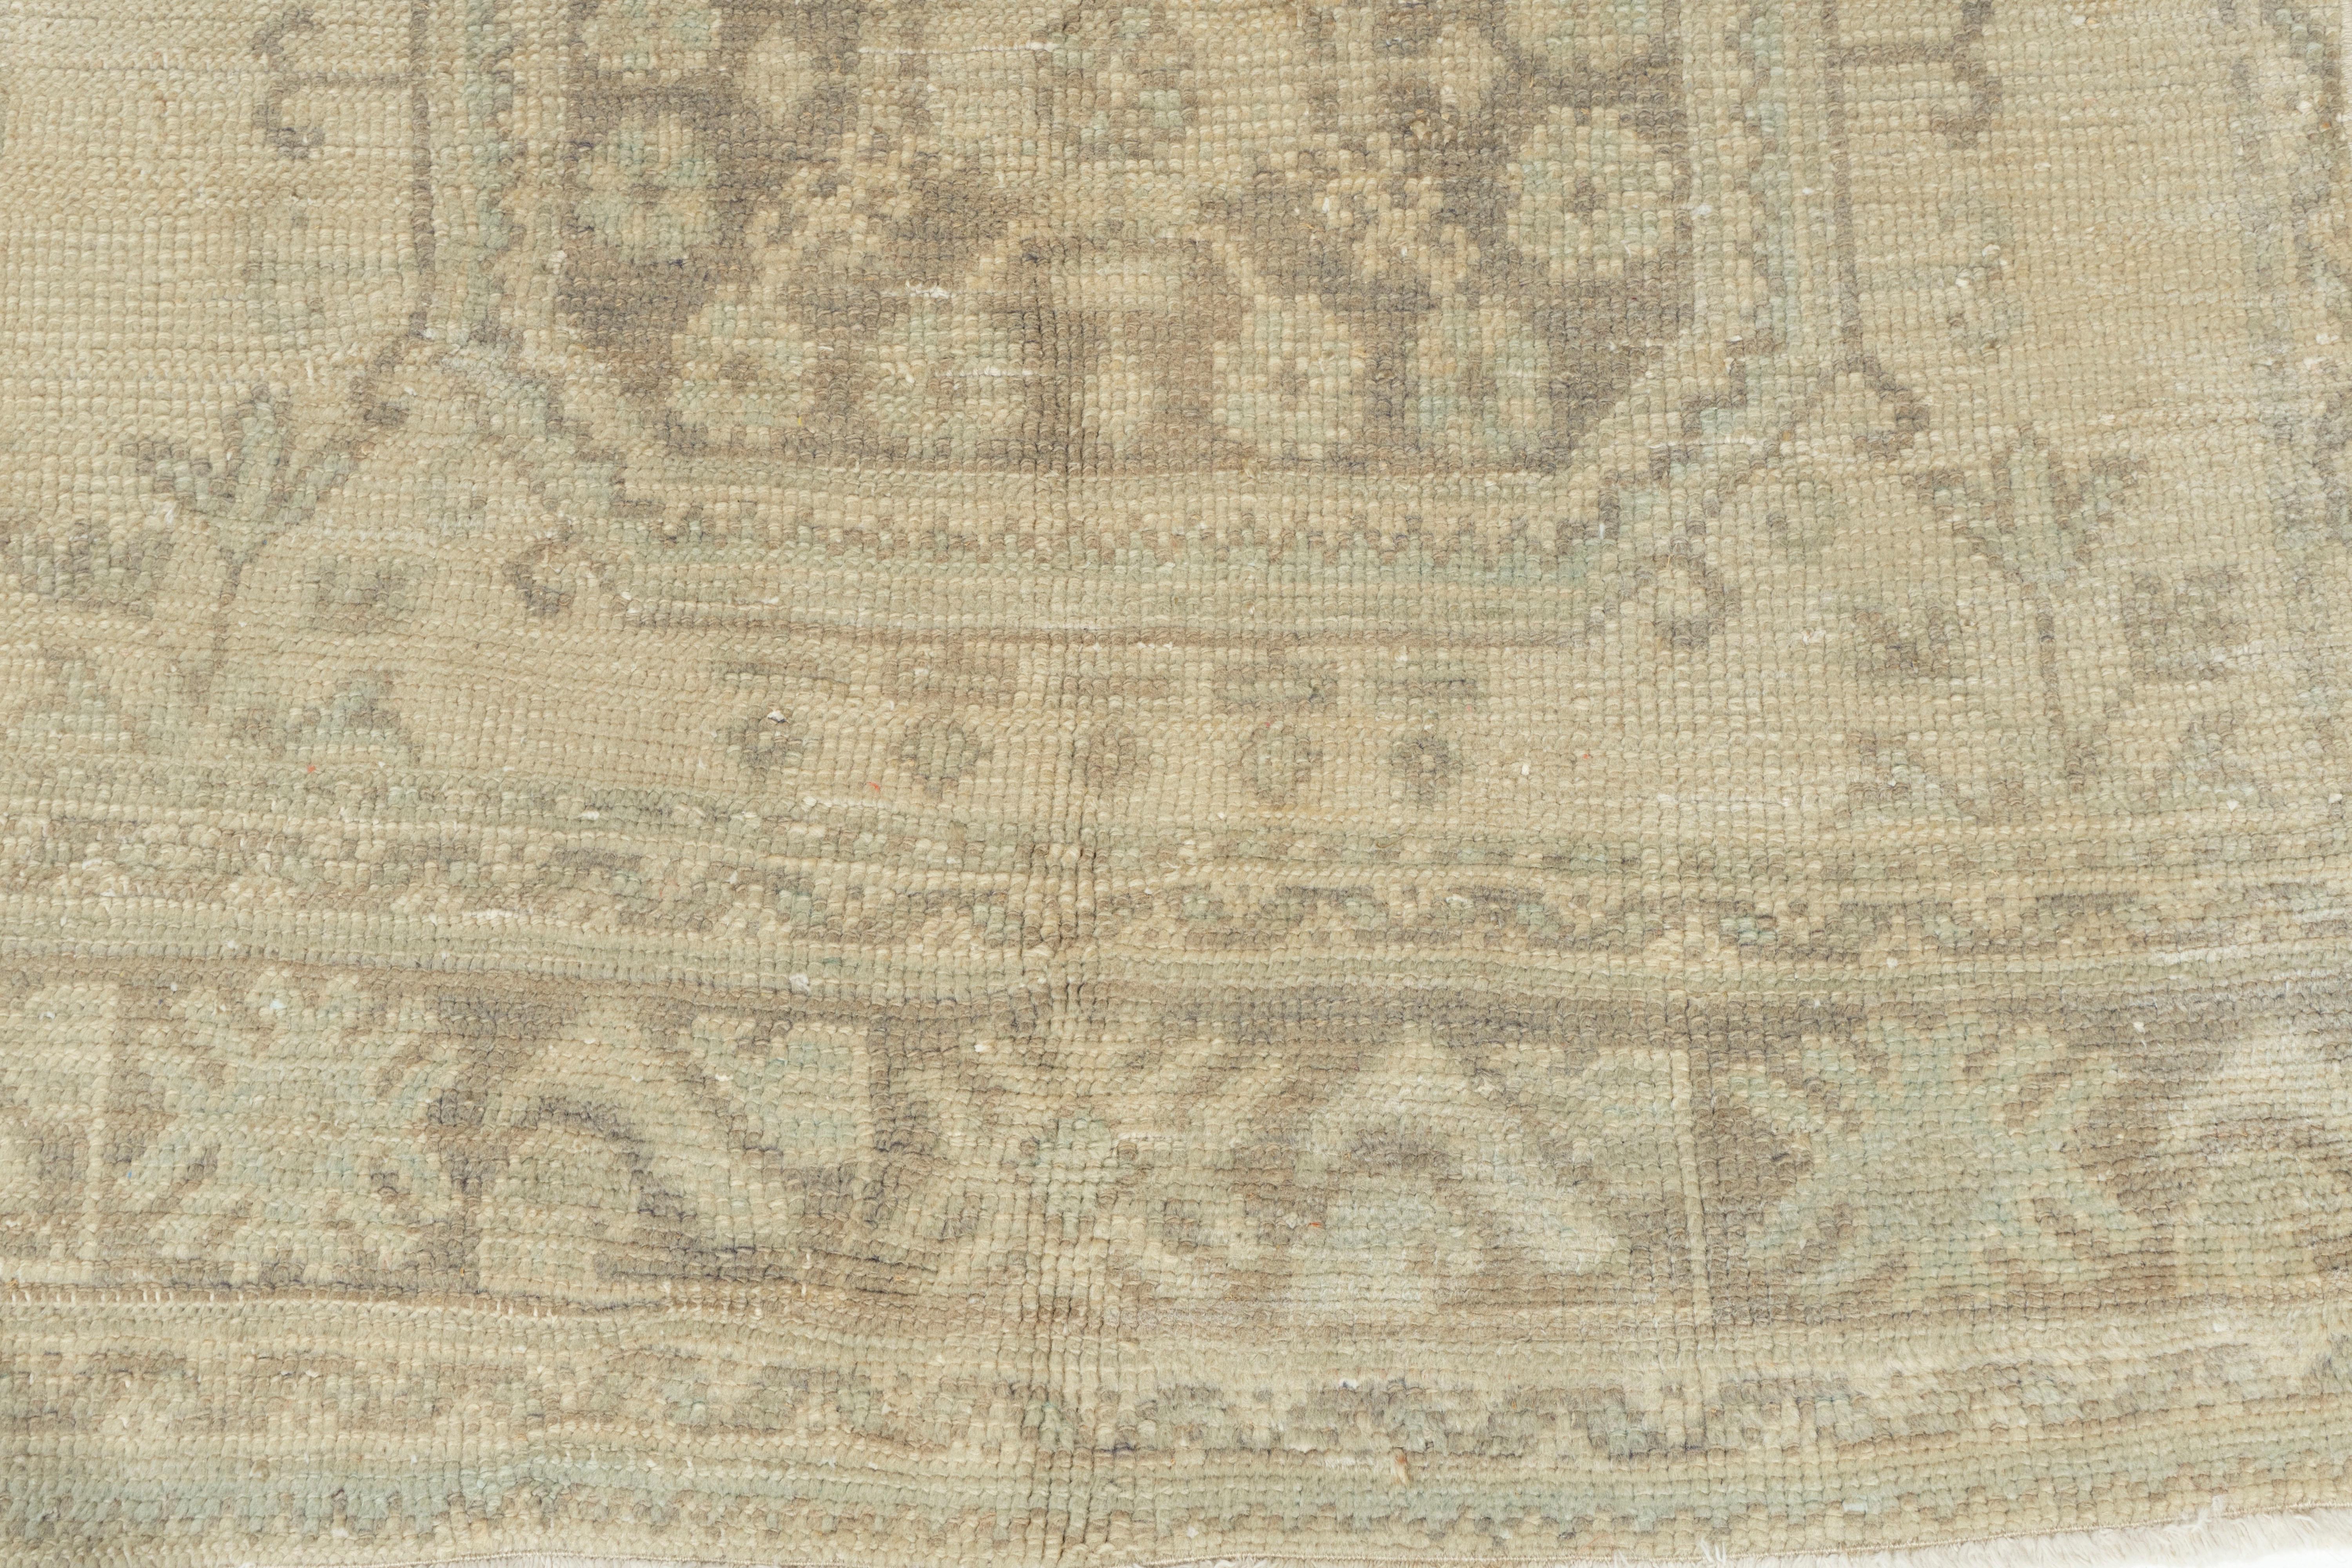 Vintage Turkish Oushak Runner 2'11 X 11' In Good Condition For Sale In New York, NY